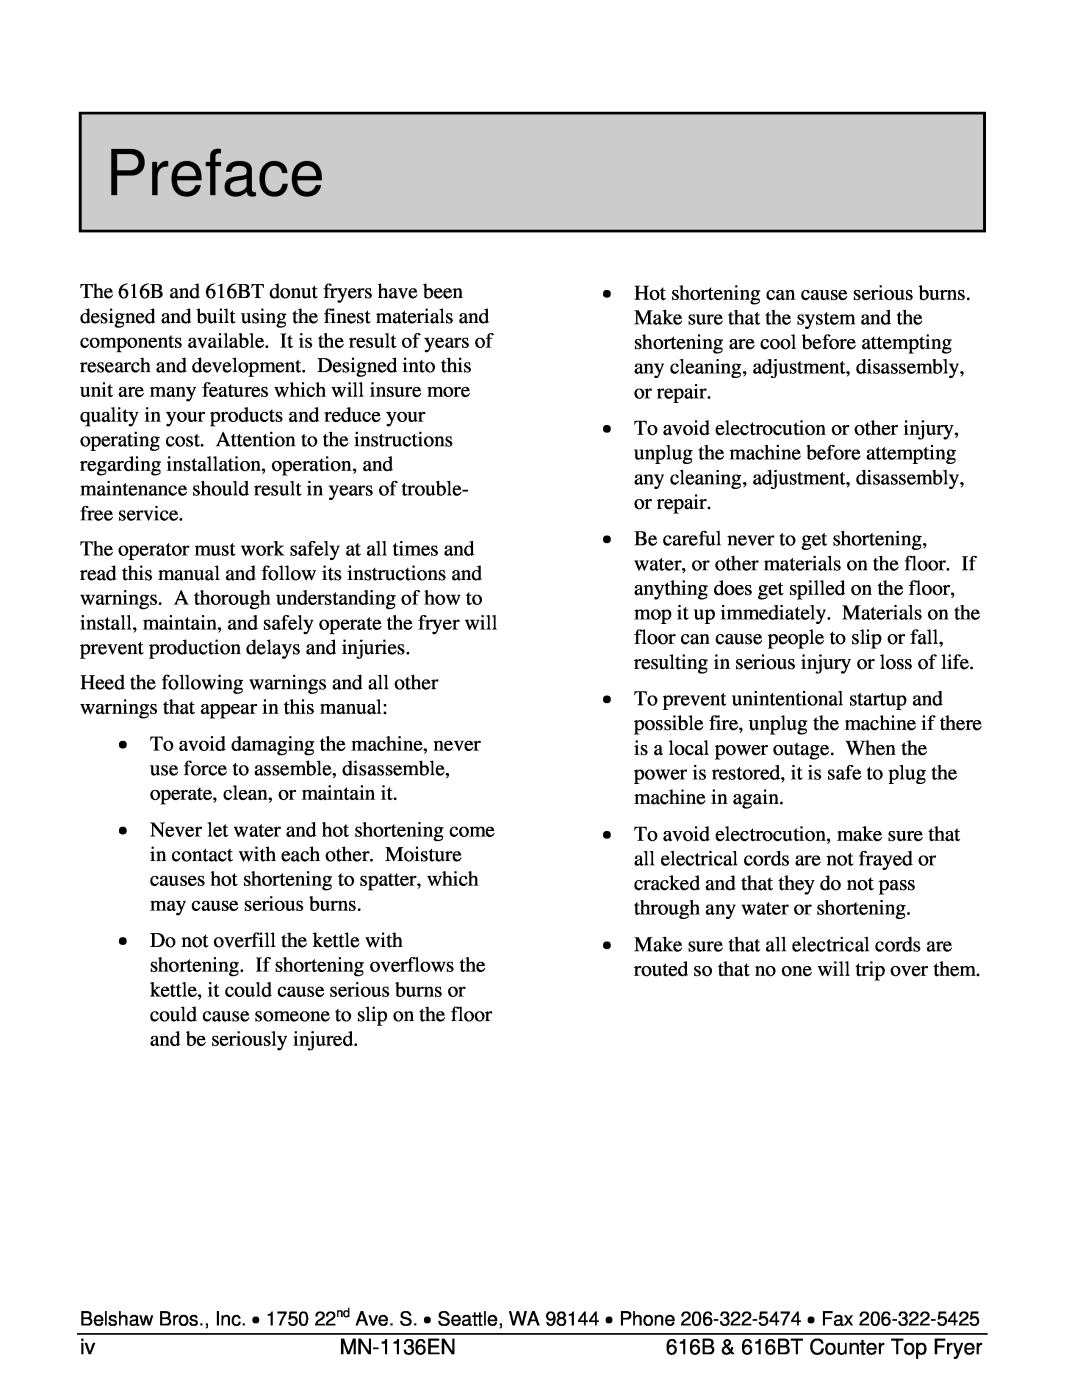 Belshaw Brothers 616BT manual Preface 